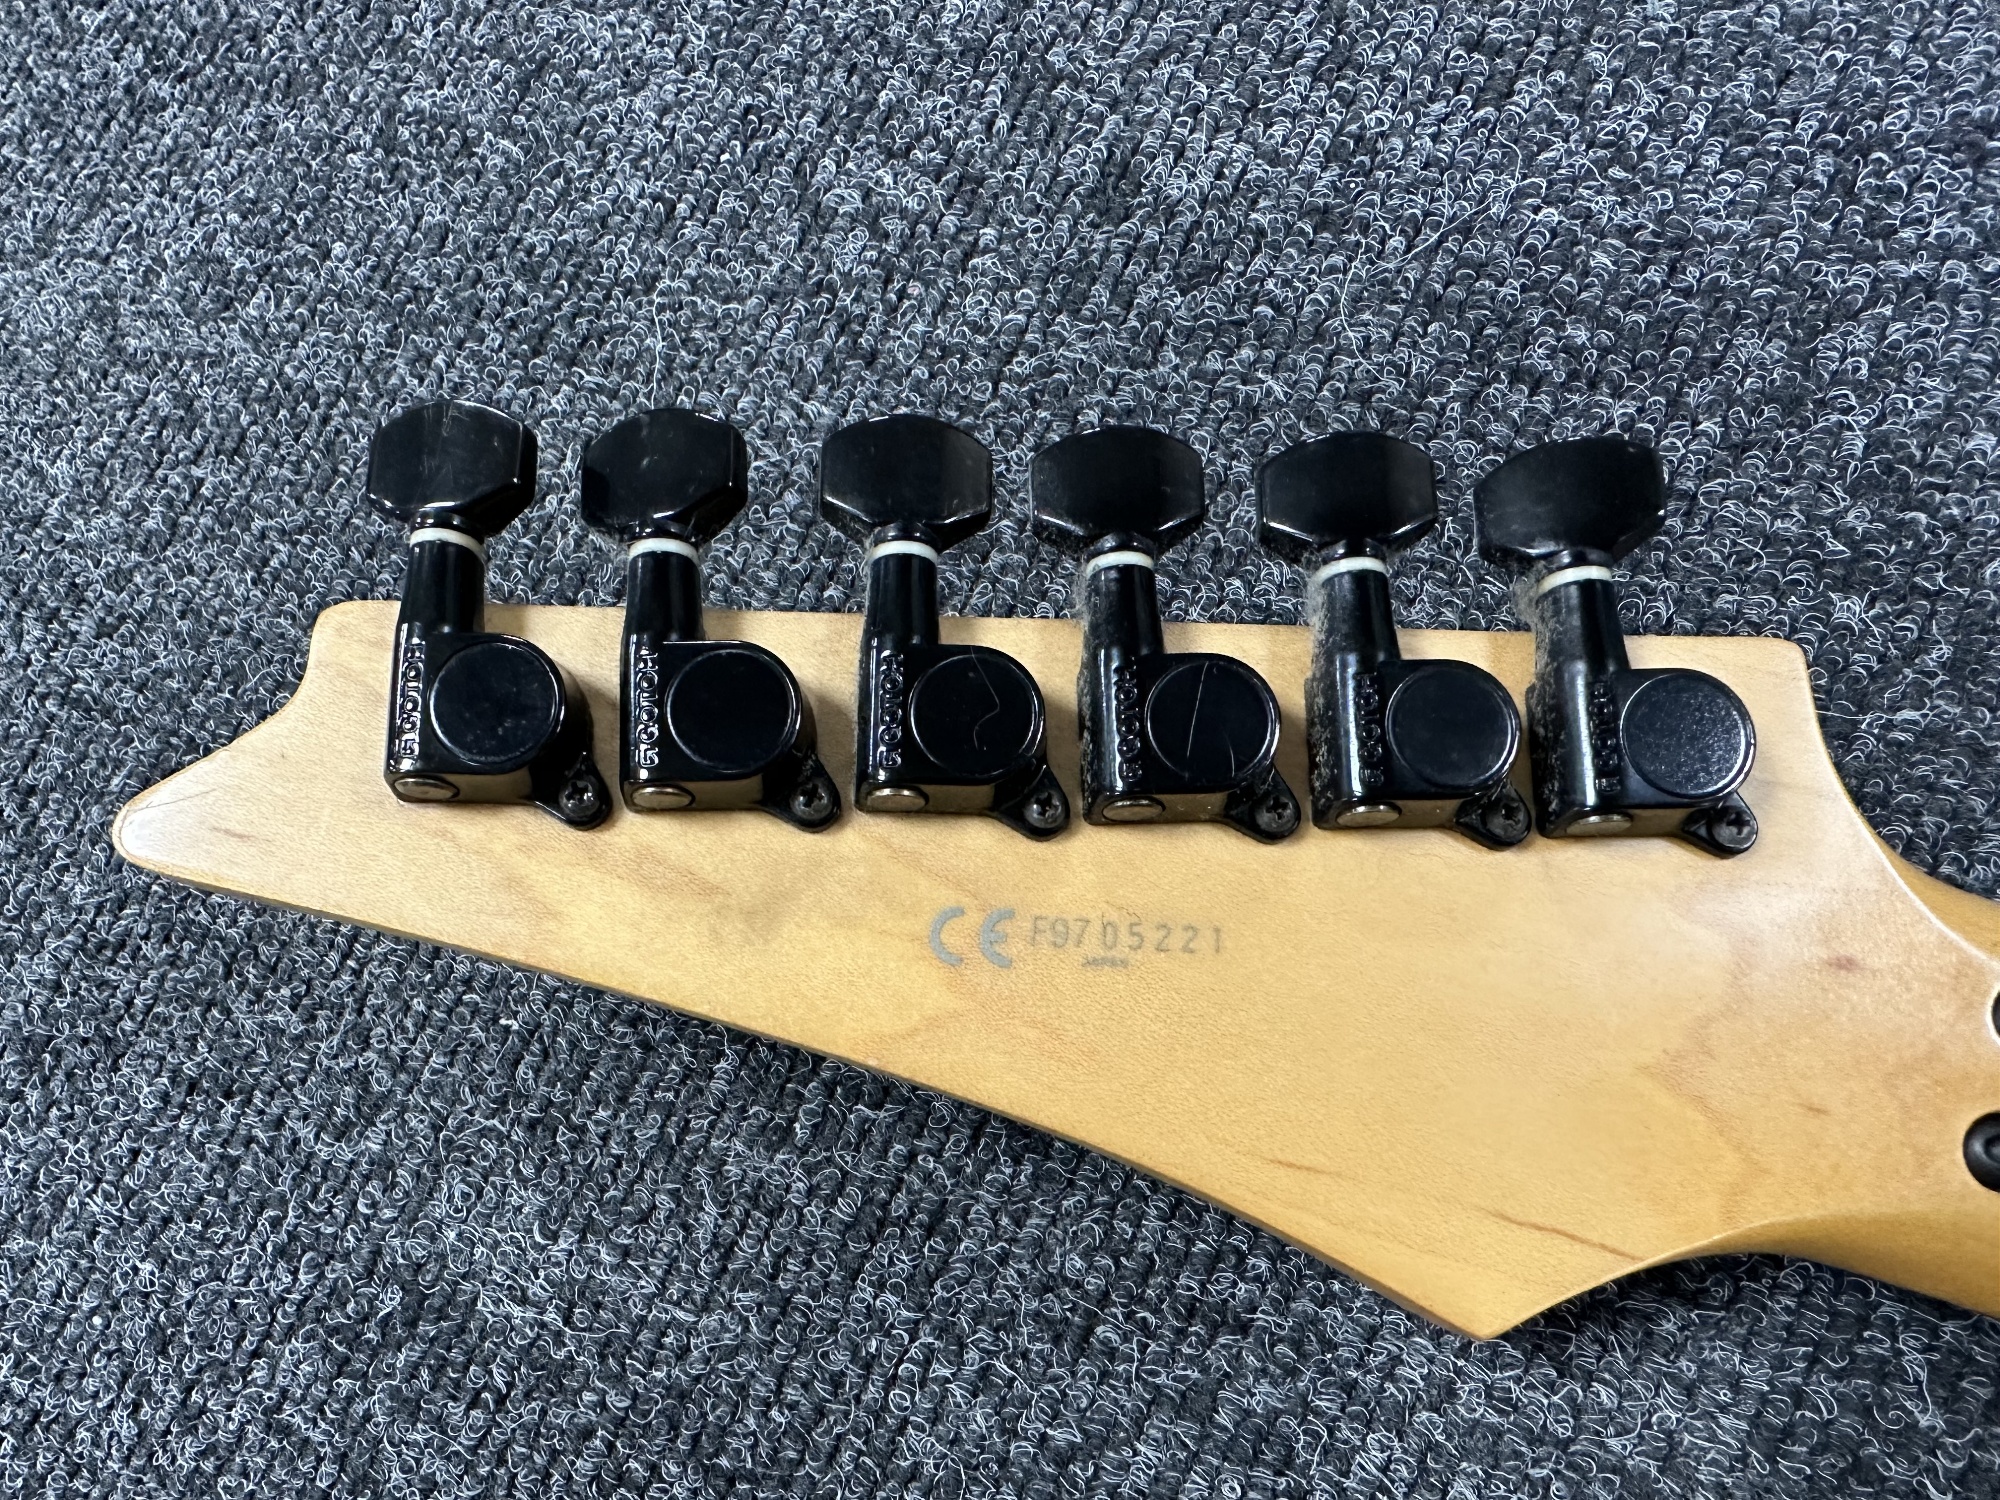 An Ibanez electric guitar, serial number F9705221, Made in Japan, in hard carry case. - Image 7 of 8